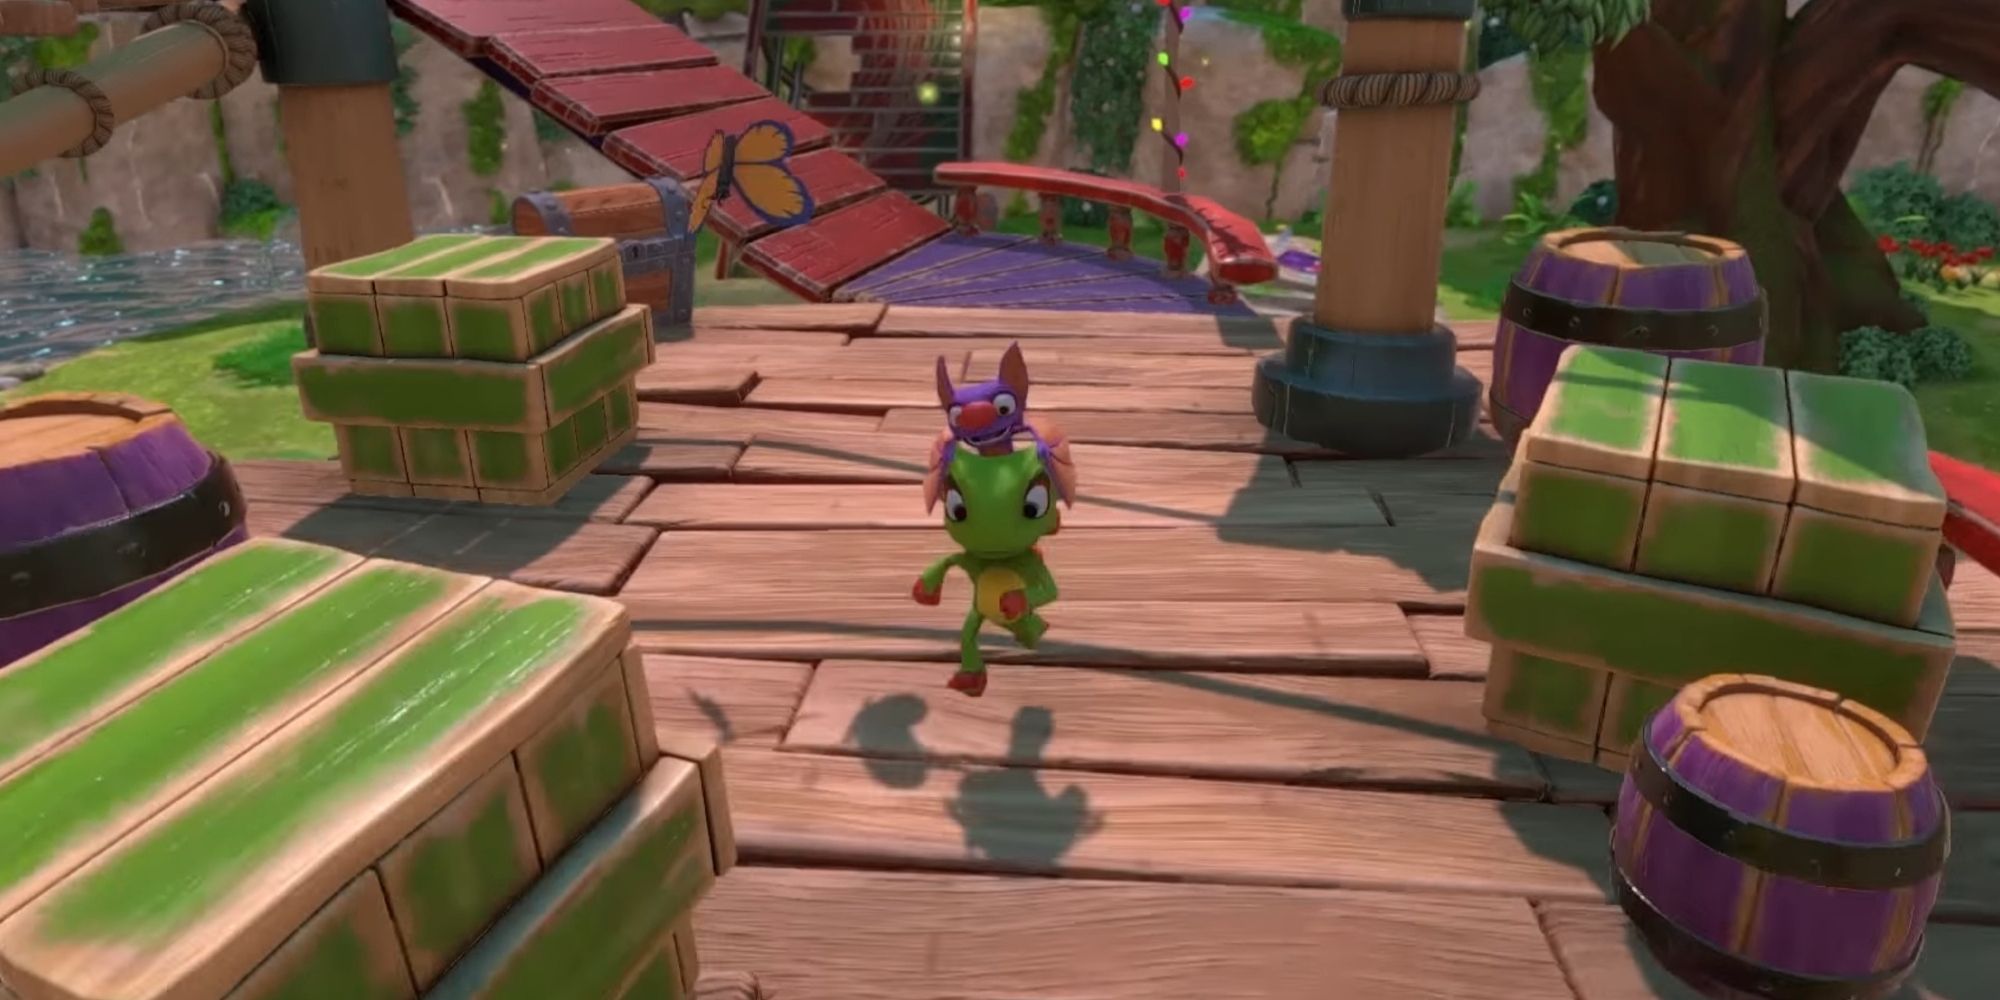 Yooka and Laylee running on a stage